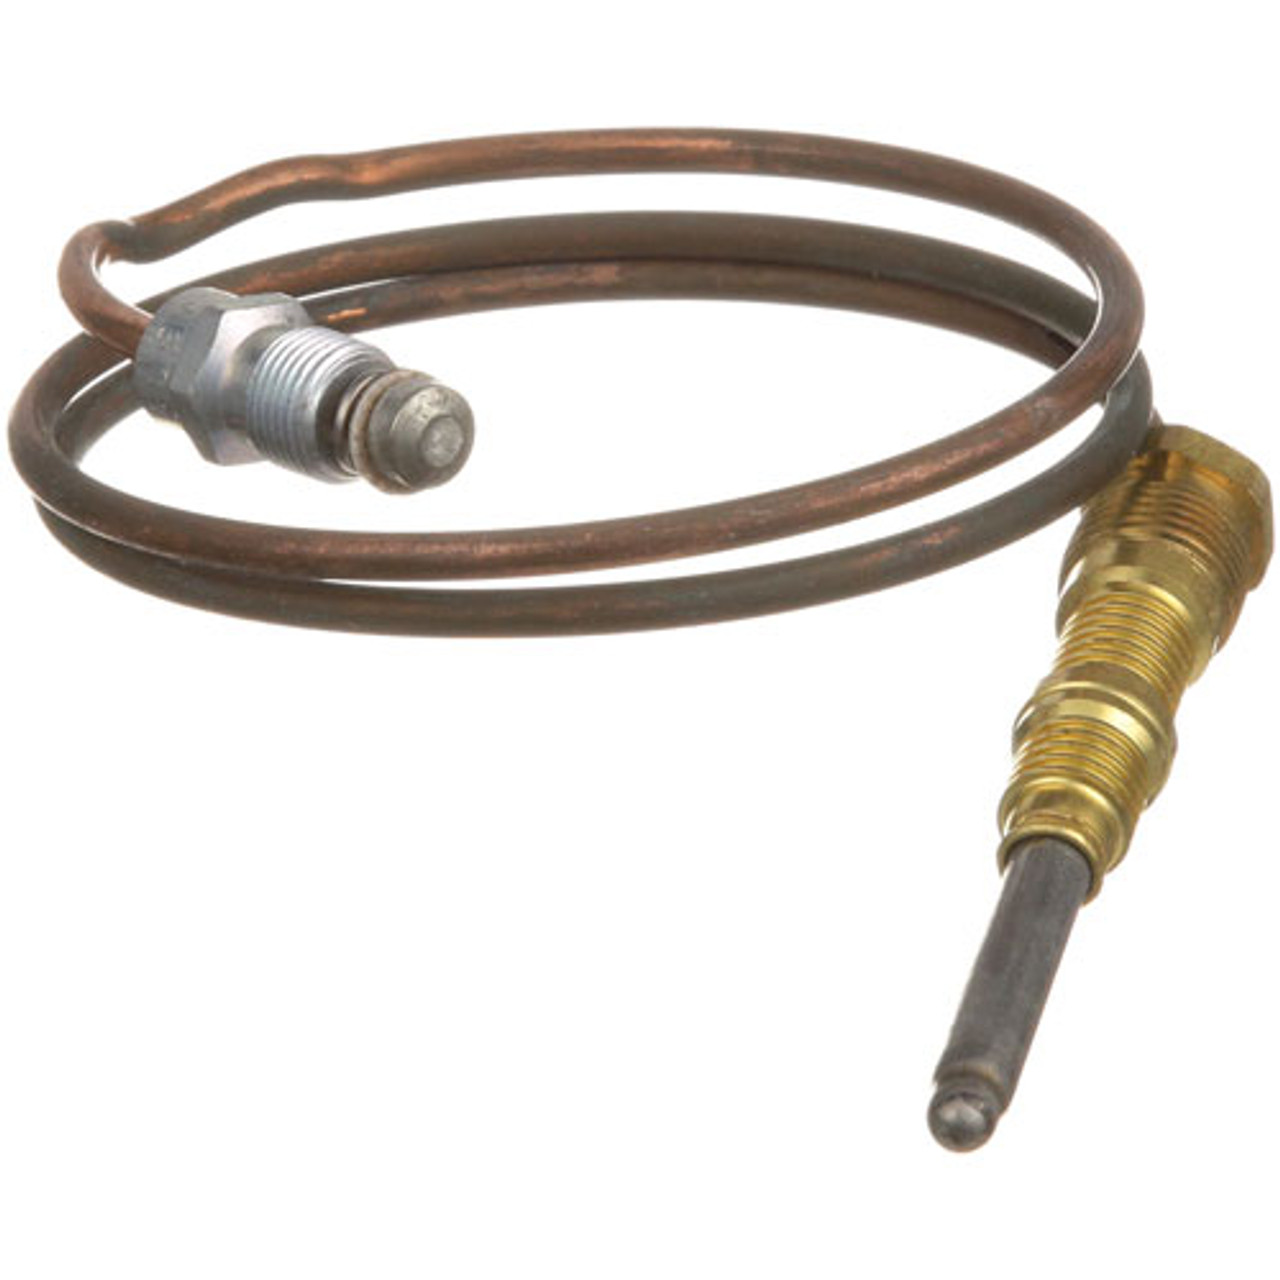 H/D Thermocouple - Replacement Part For Hobart 412788-00003